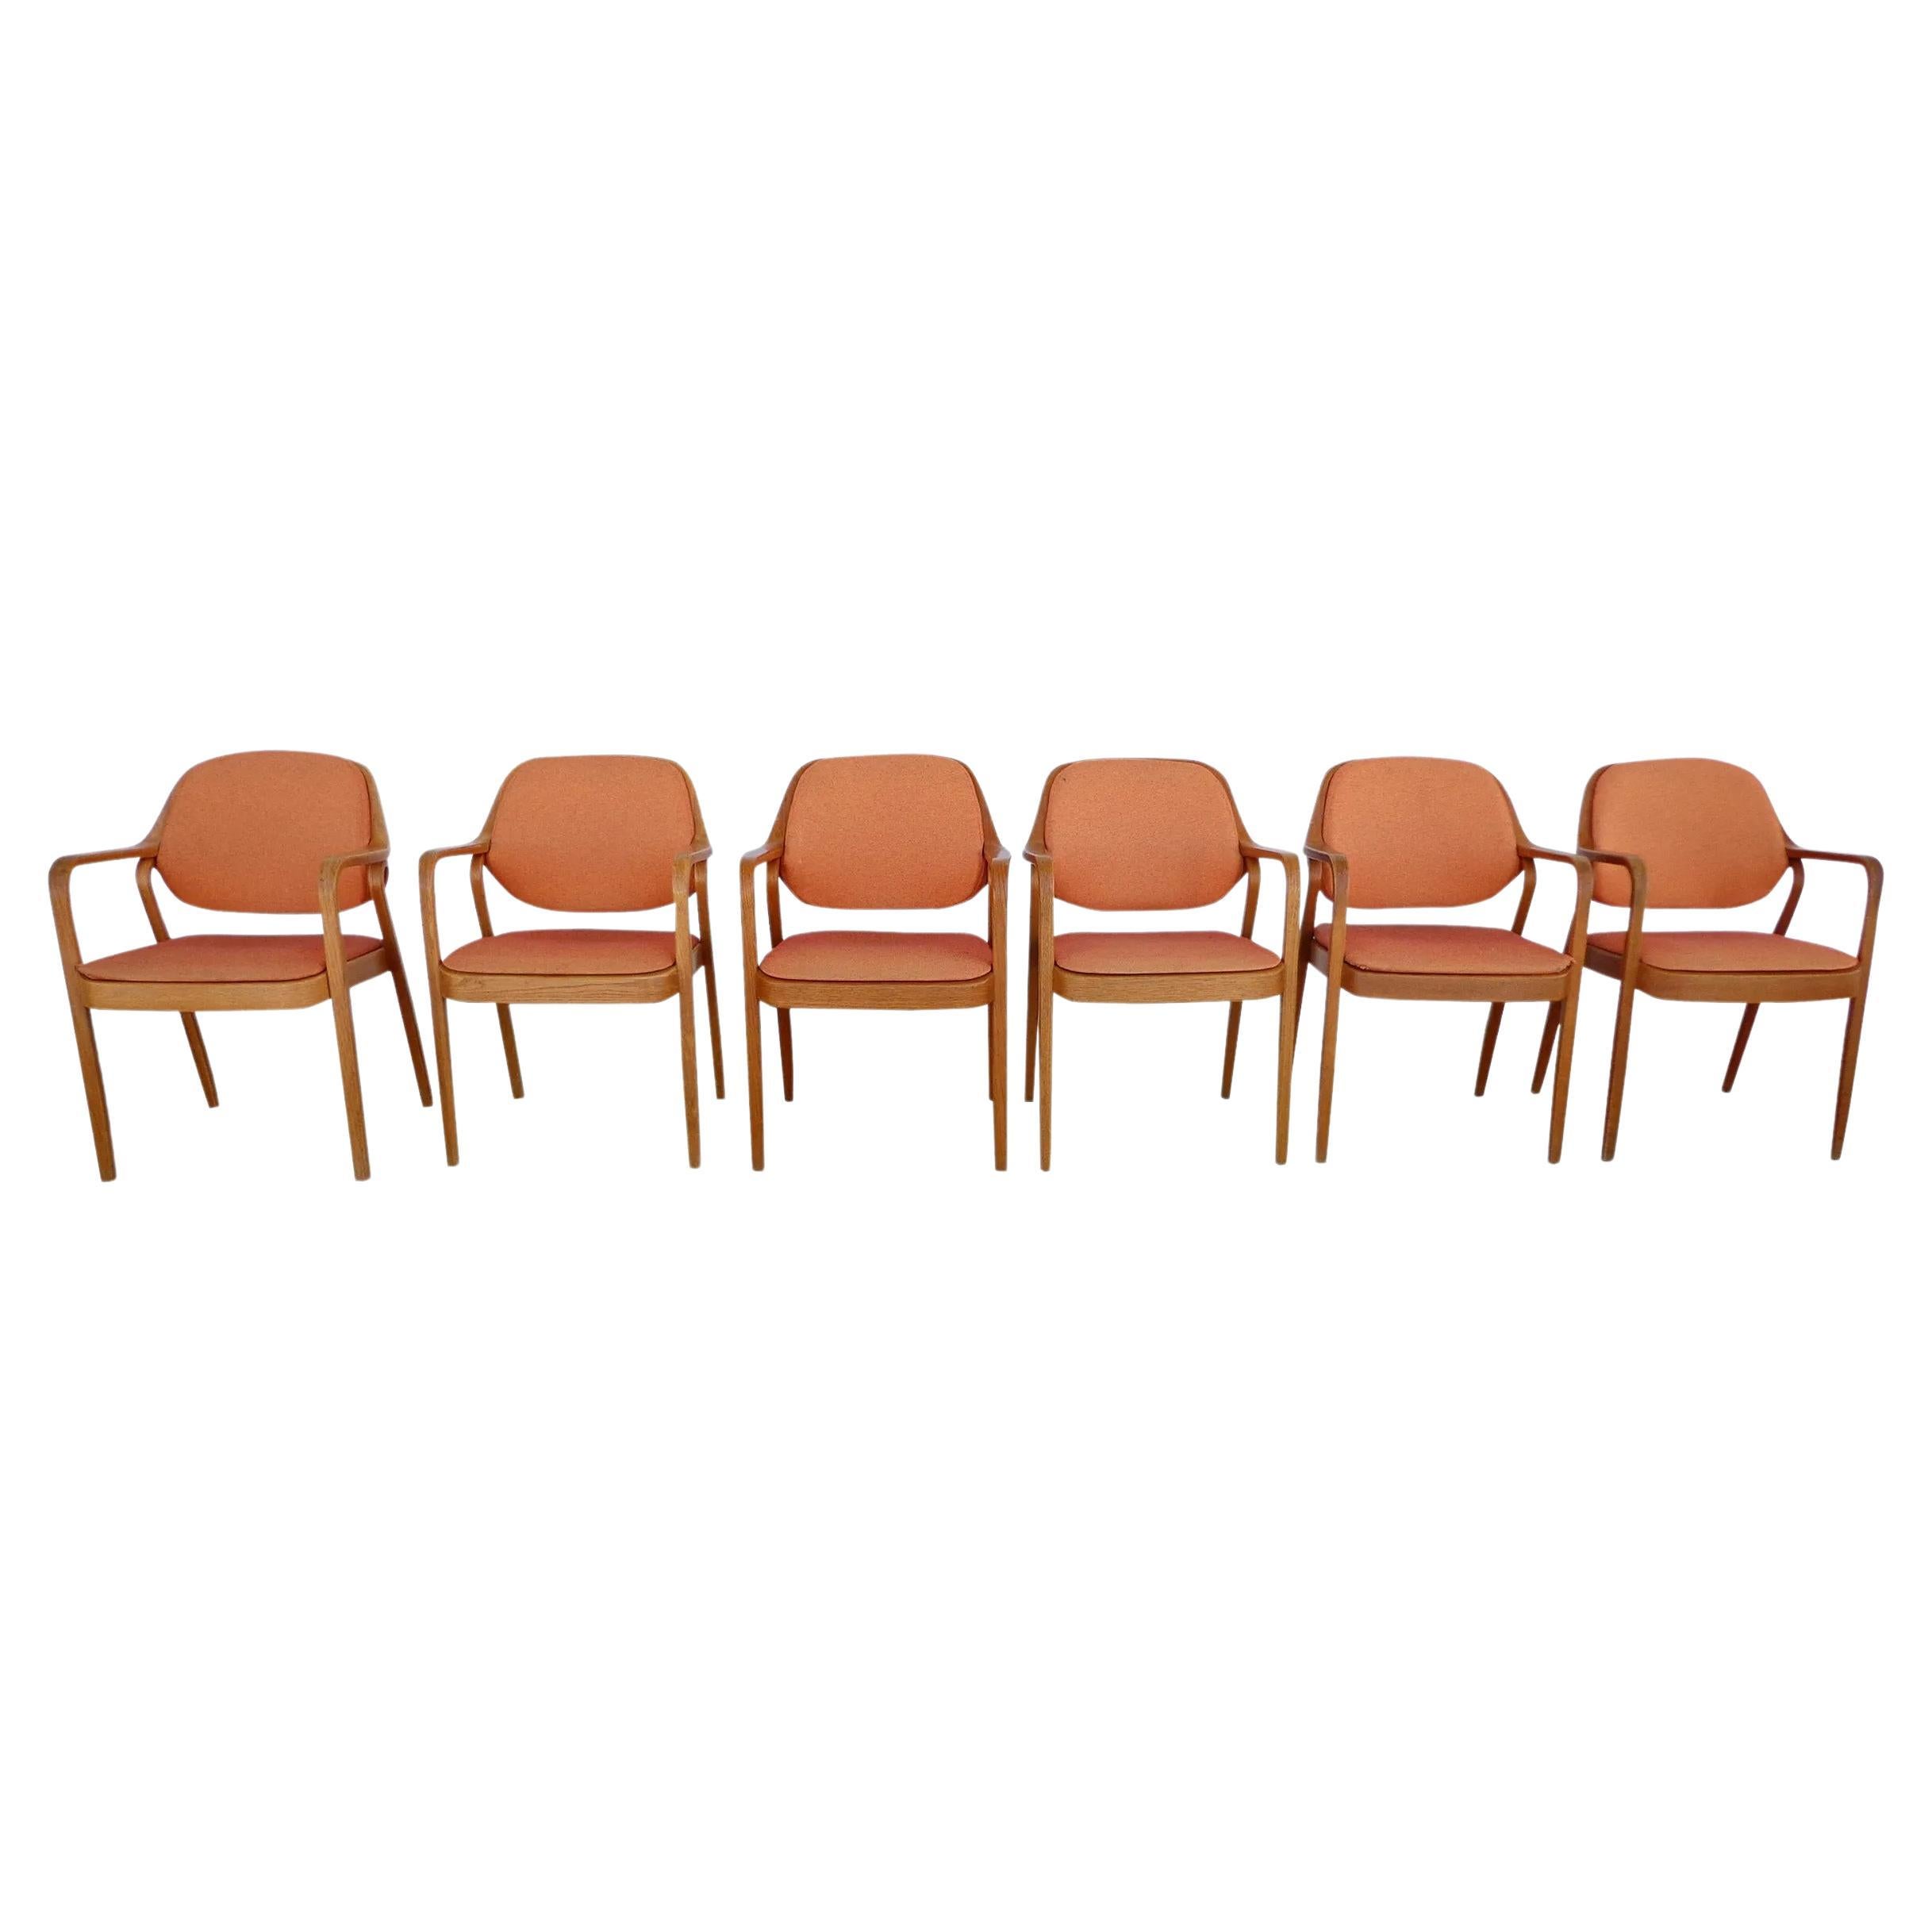 1 vintage Knoll Don Petitt model #1105 oak armchair

Bentwood armchairs by Don Petitt for Knoll. Sculpted oak comprise legs and arms as well as the seat back frames. Chairs feature original Knoll orange upholstery.